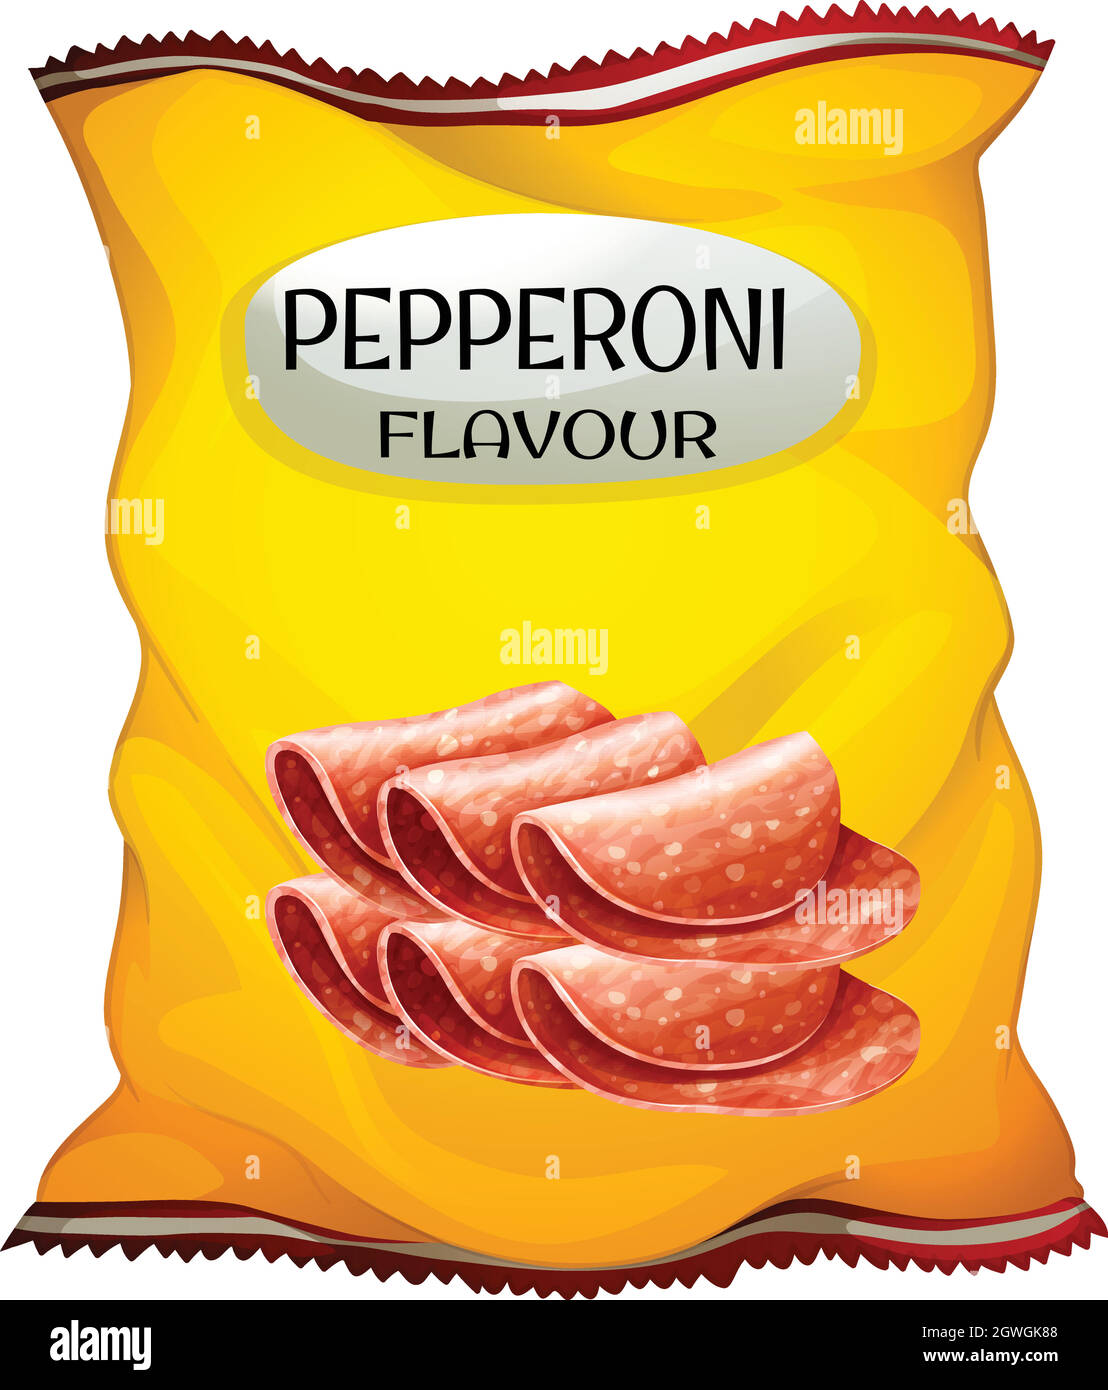 Snack with pepperoni flavor Stock Vector